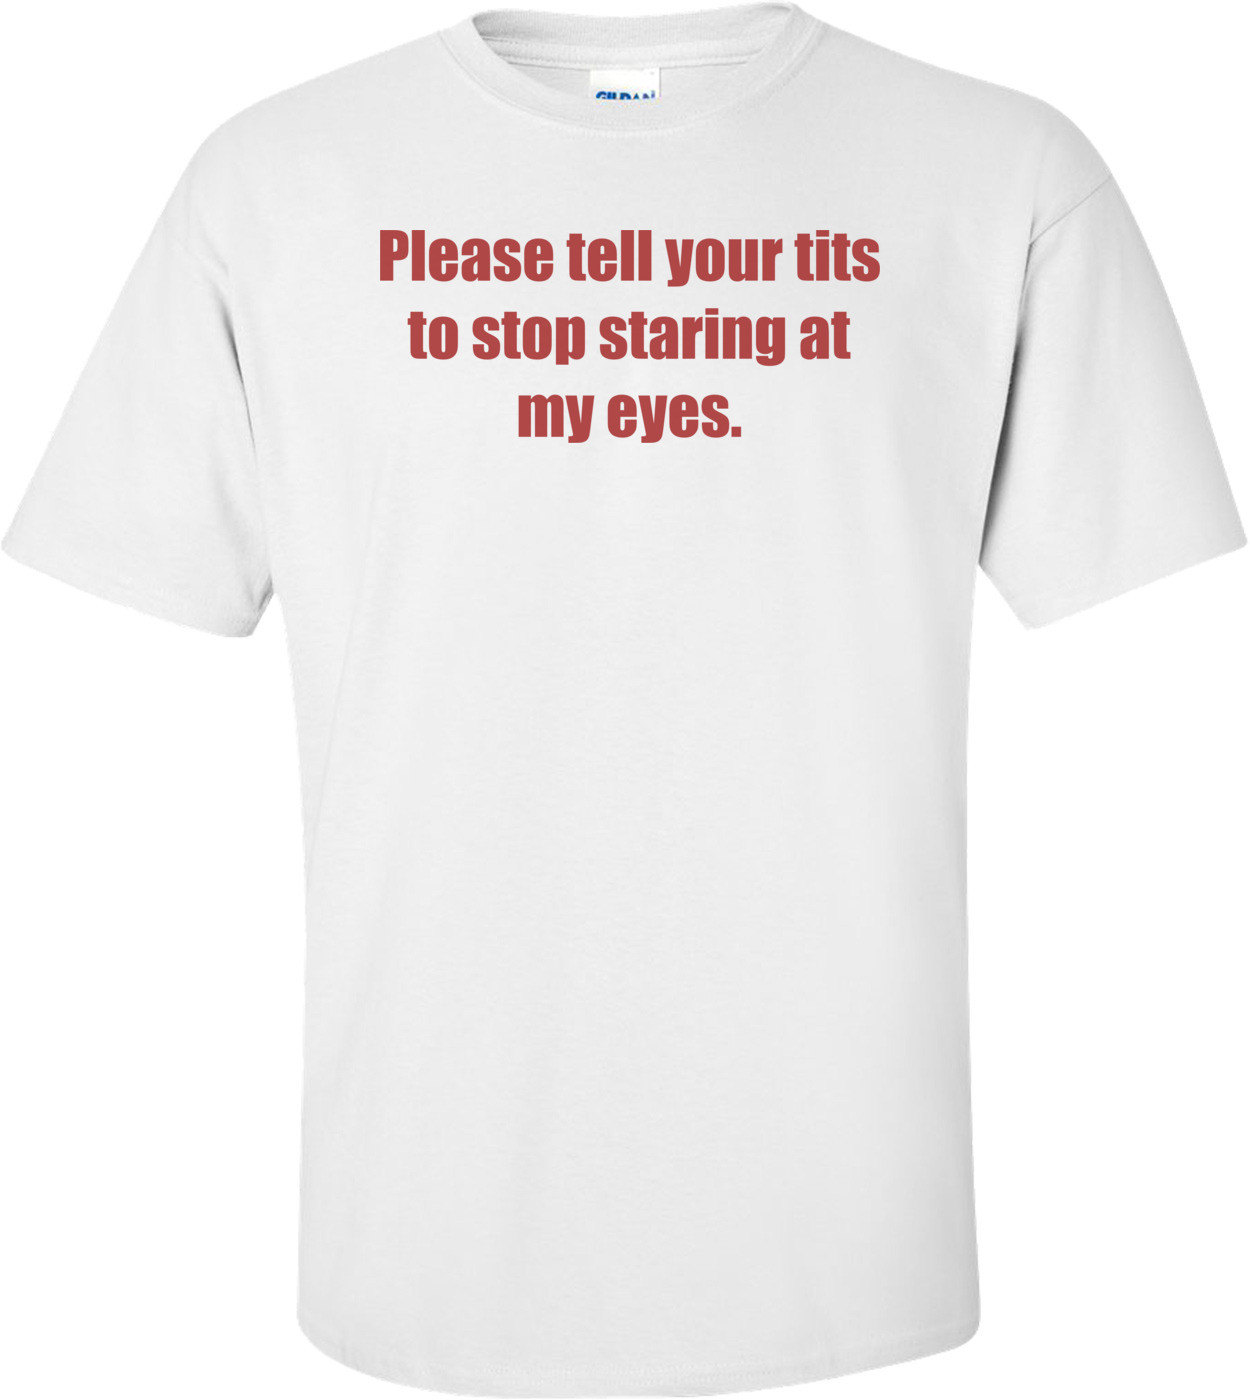 Please tell your tits to stop staring at my eyes. Shirt